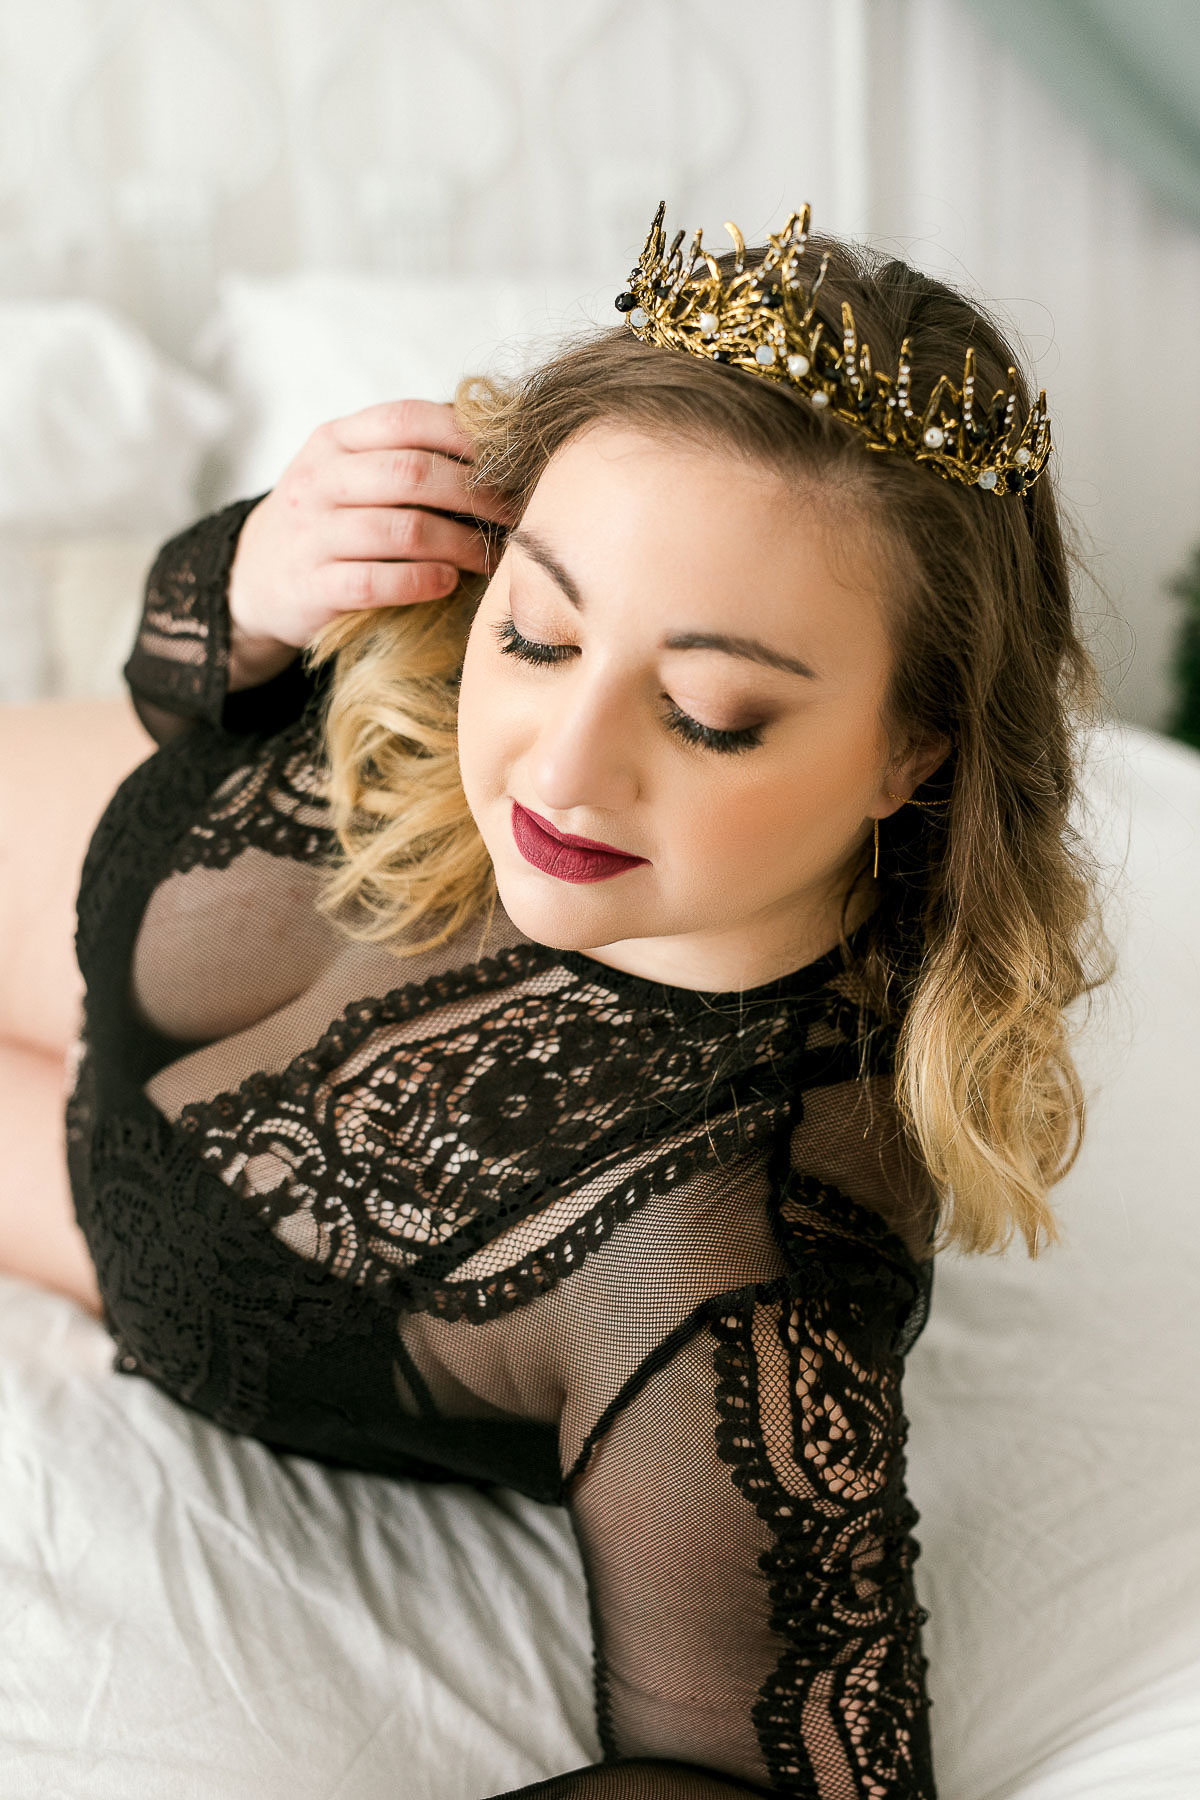 Woman wearing a gold crown and wearing a black lace outfit at boudoir session